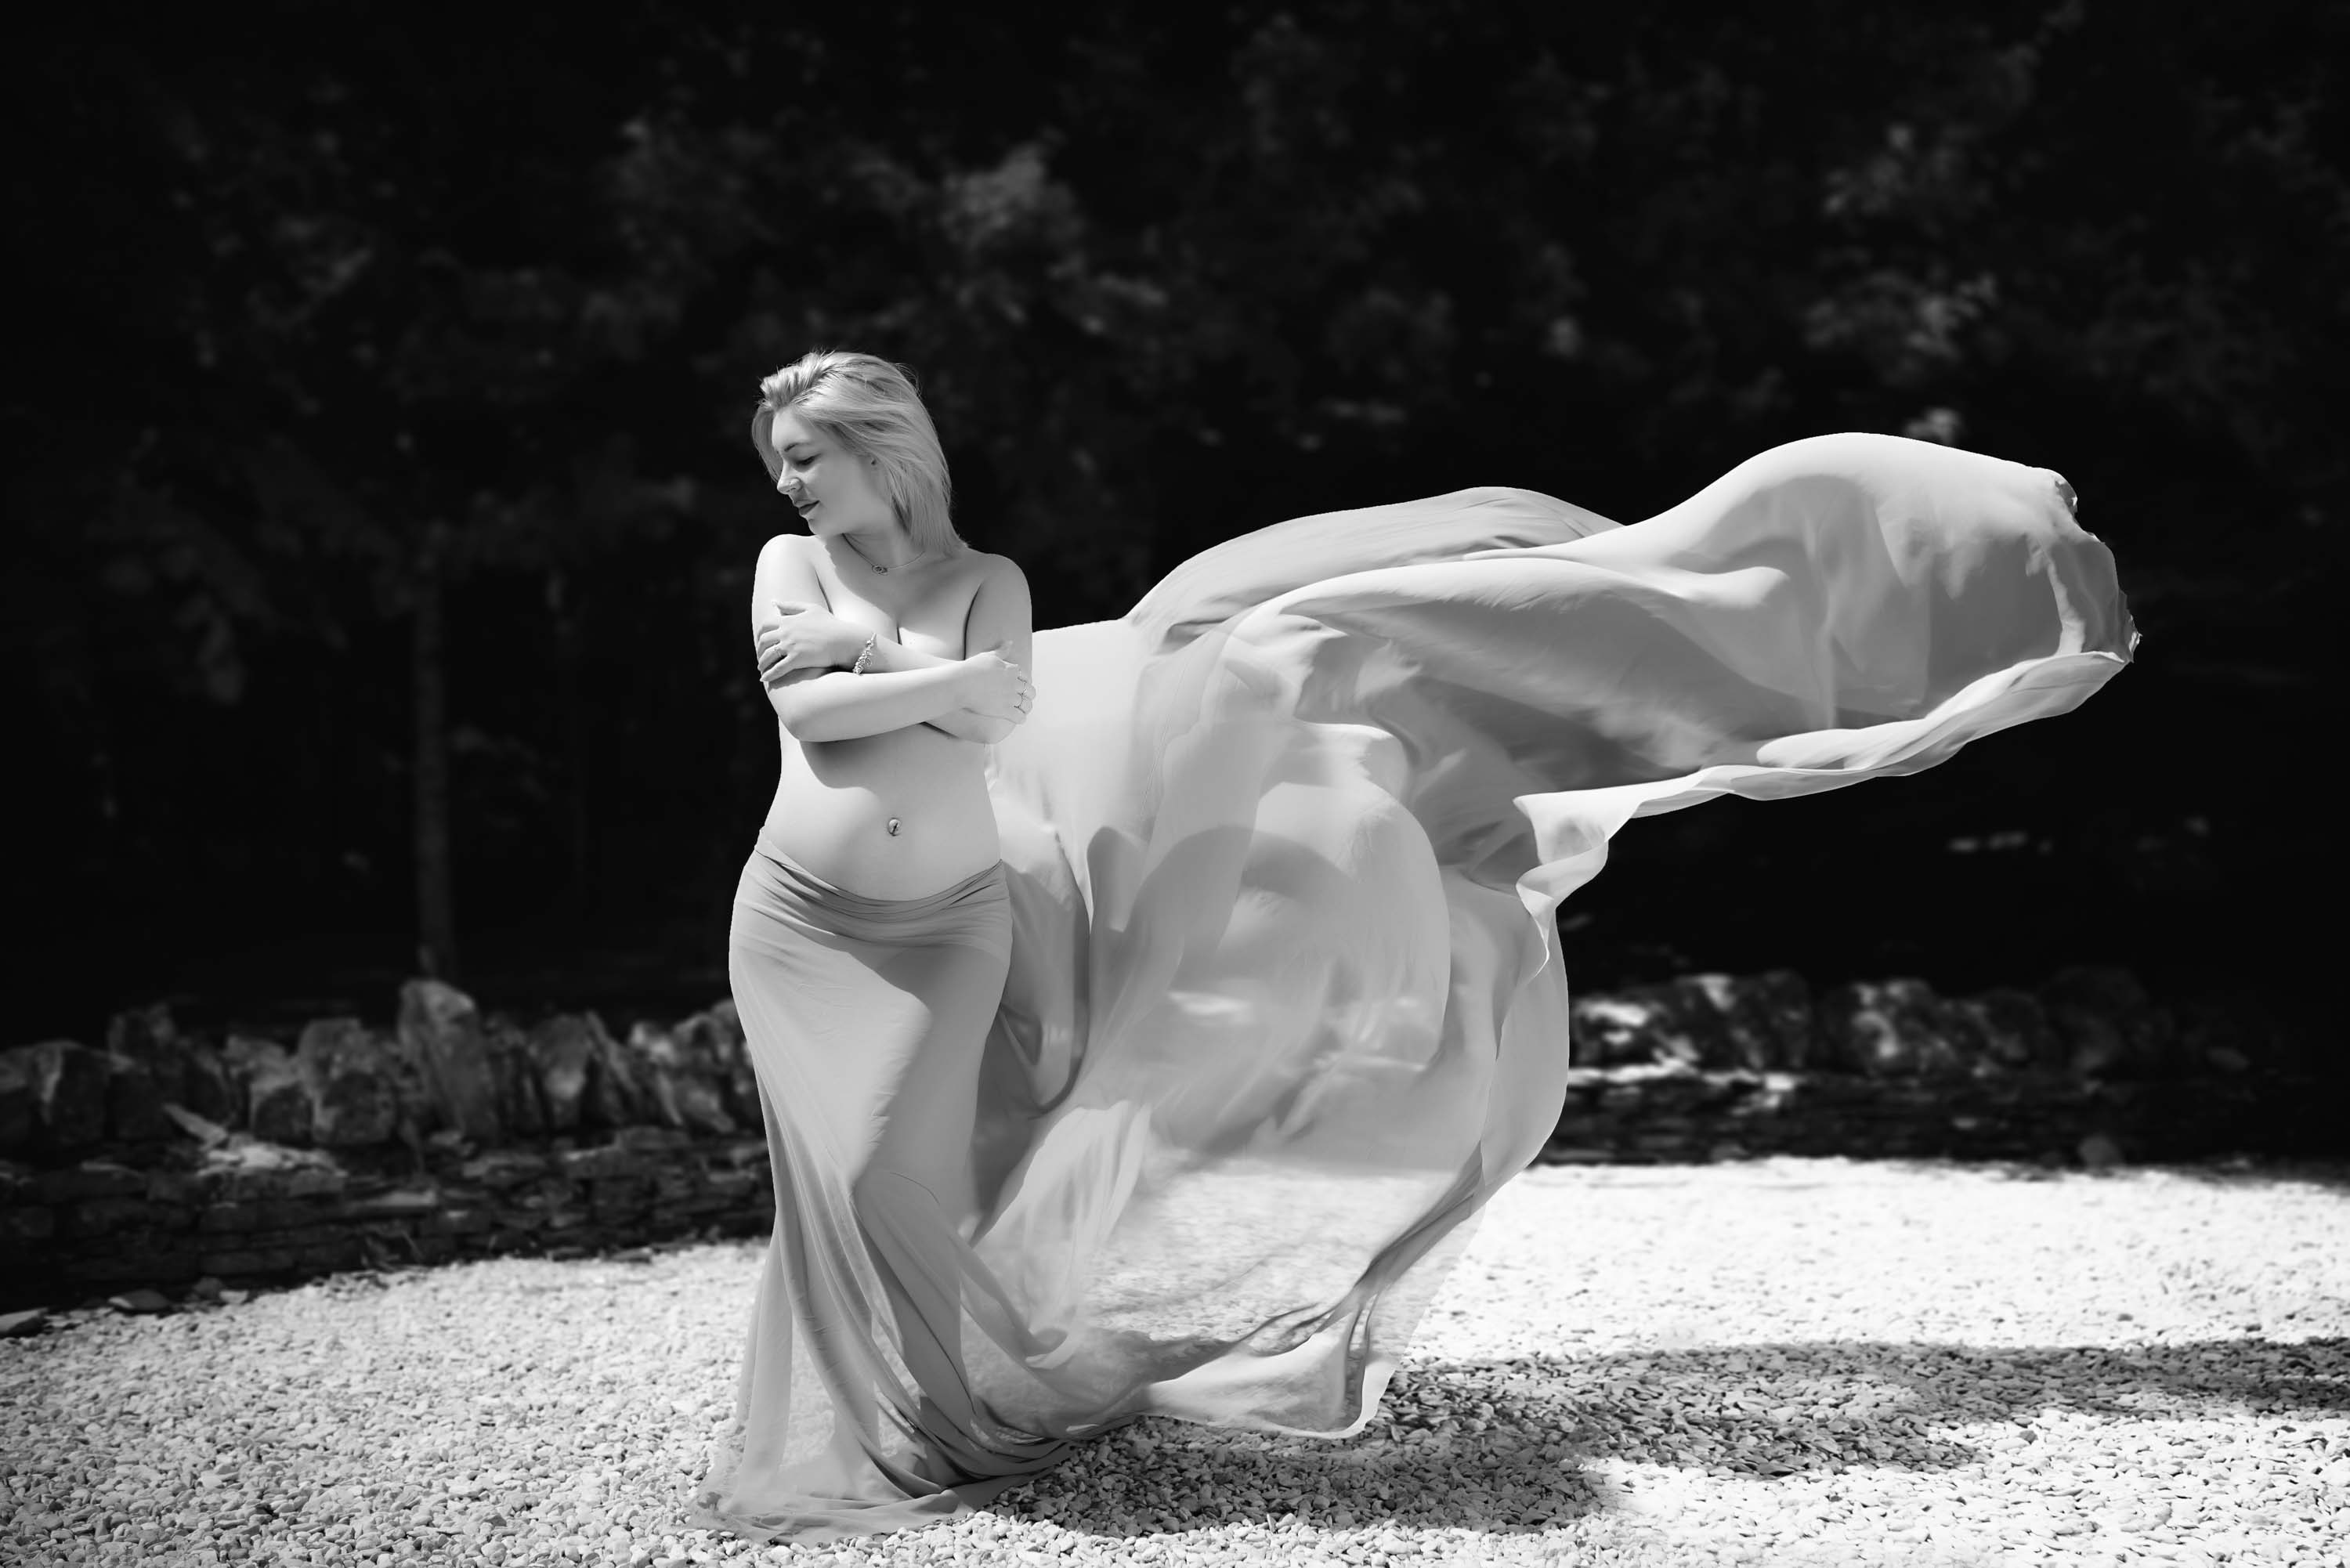 Pregnant women standing in gravelled courtyard with her maternity gown blowing in the wind